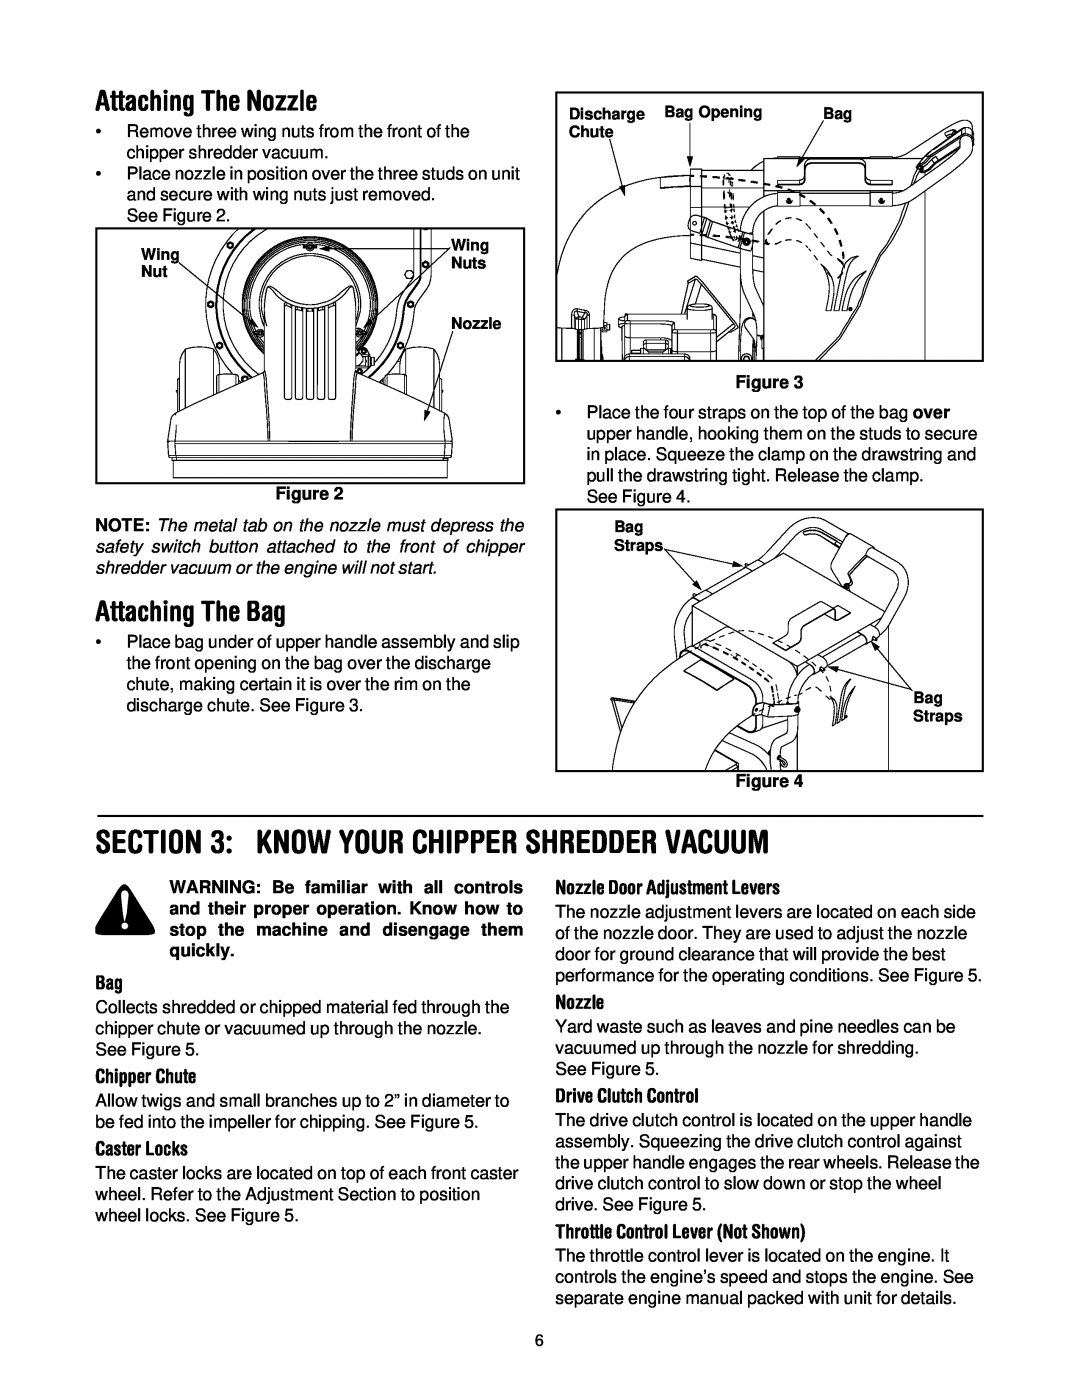 Yard-Man 203 manual Know Your Chipper Shredder Vacuum, Attaching The Nozzle, Attaching The Bag, Chipper Chute, Caster Locks 